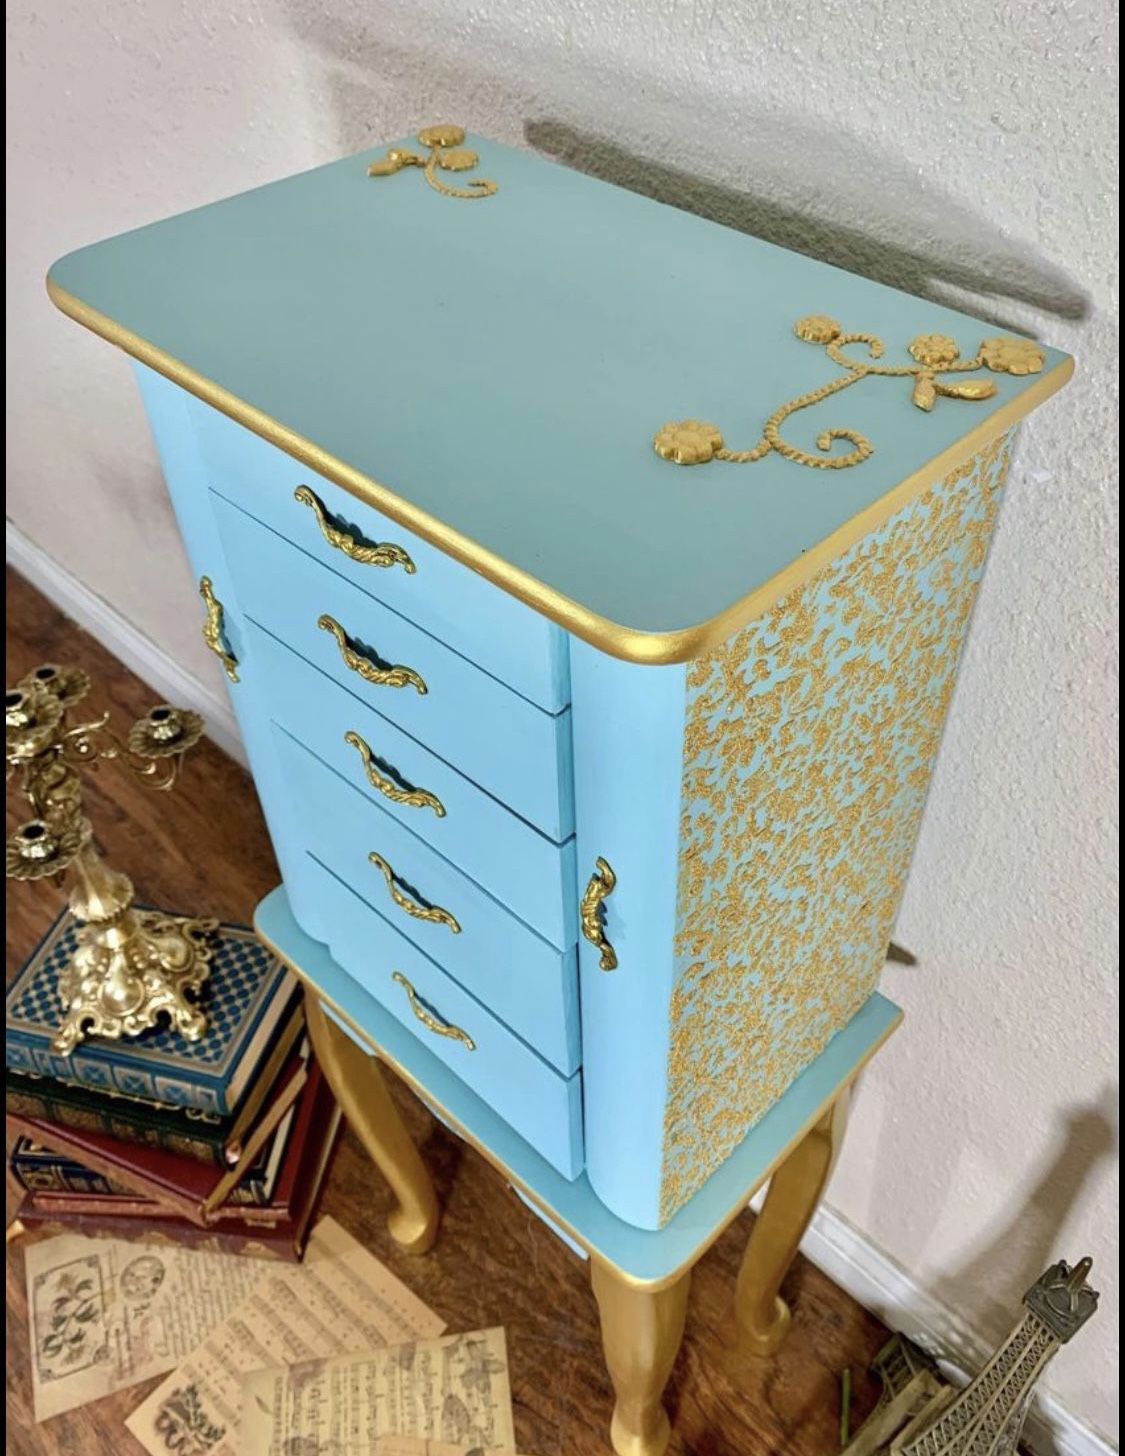 Blue/teal And Gold French Provincial Jewelry Armoire